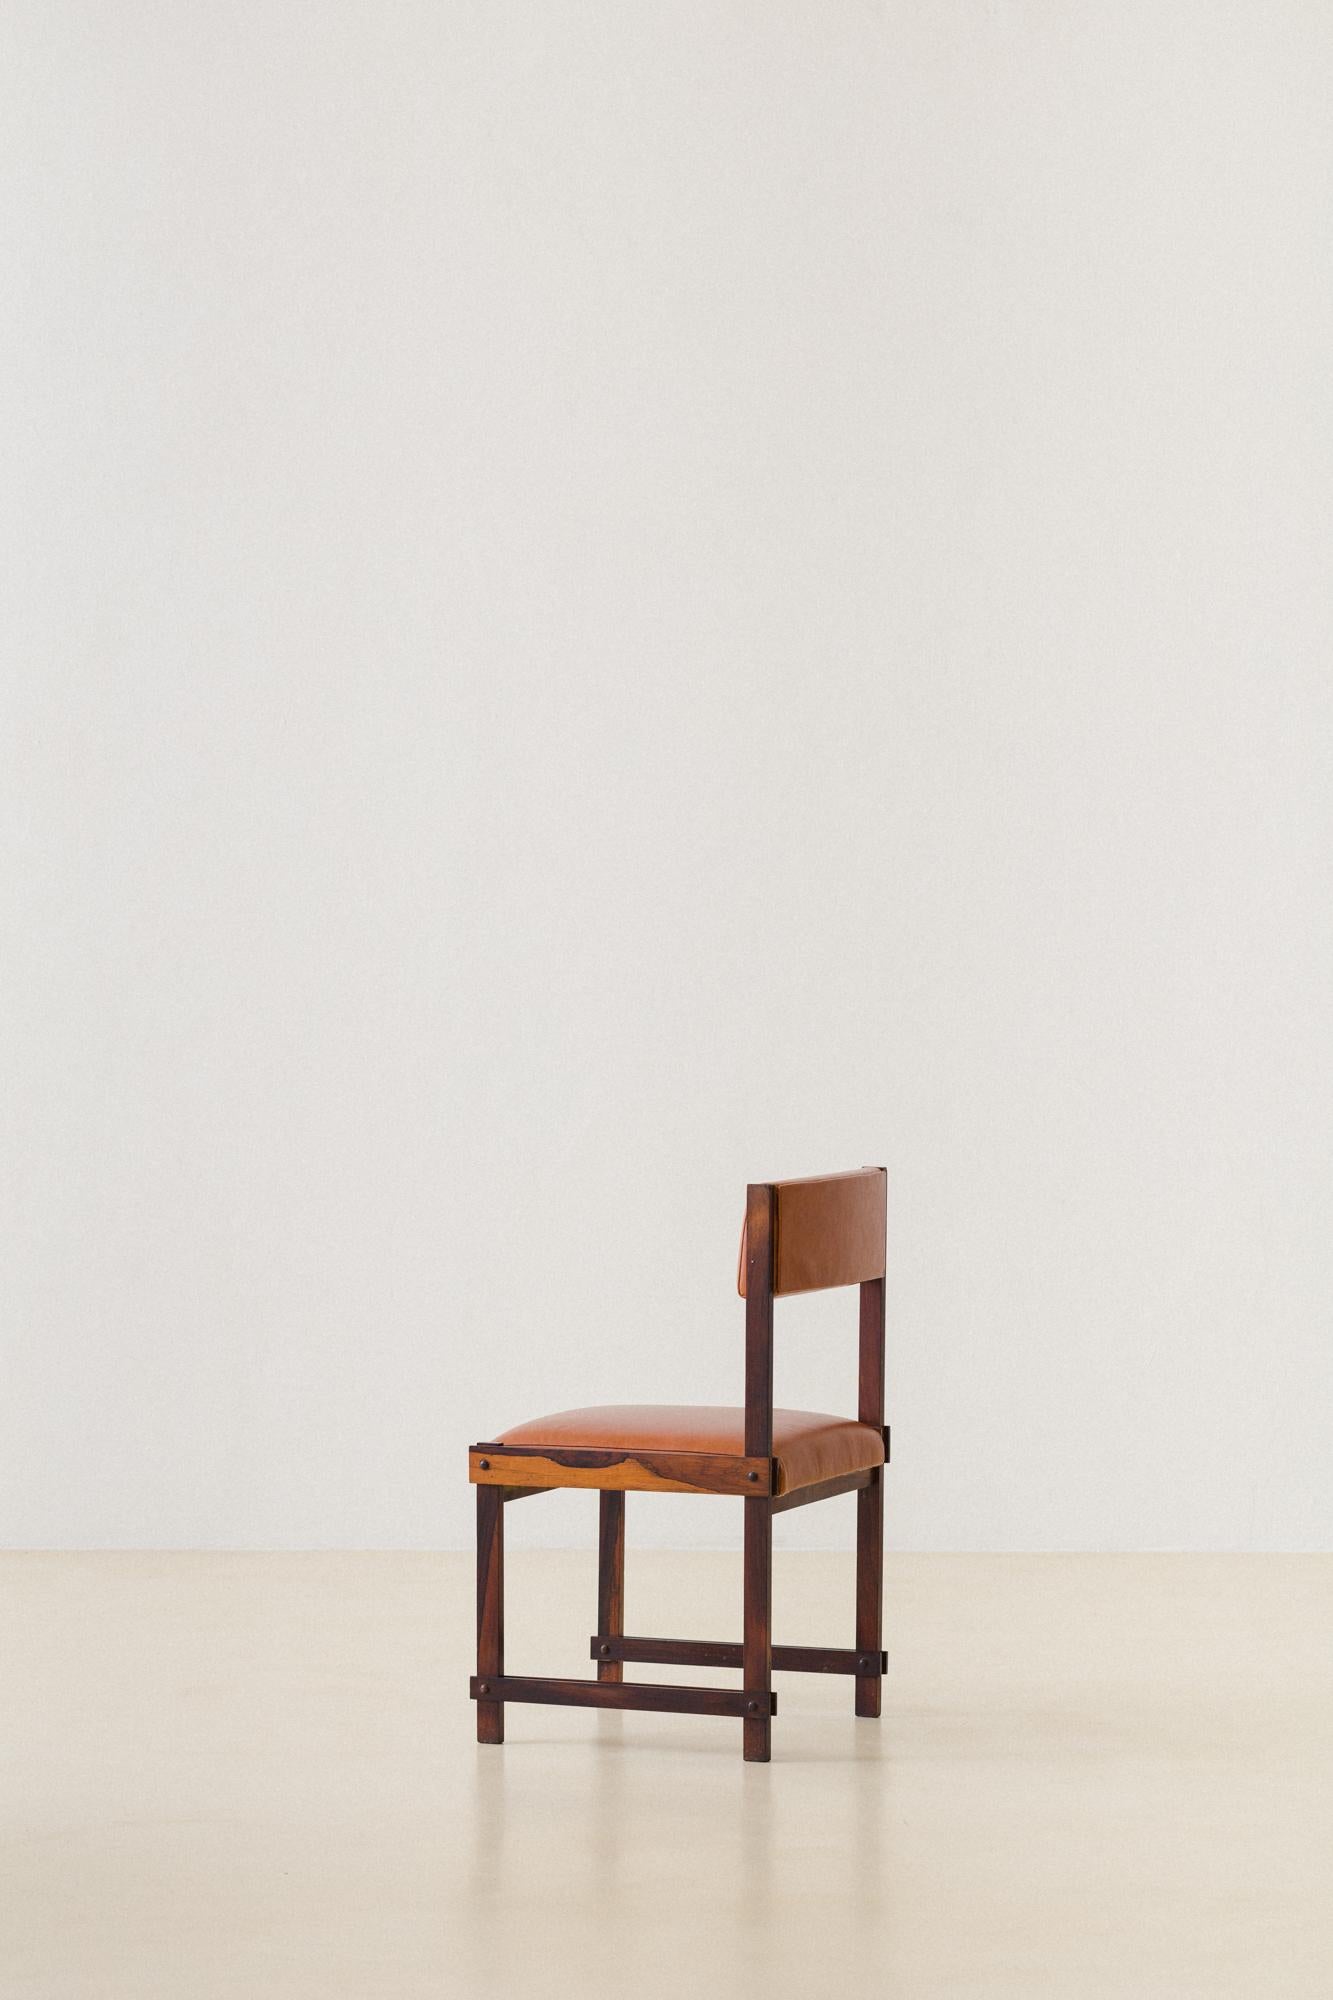 Brazilian Rosewood Dining Chairs by FAI 'Fatima Arquitetura Interiores', 1960s For Sale 2